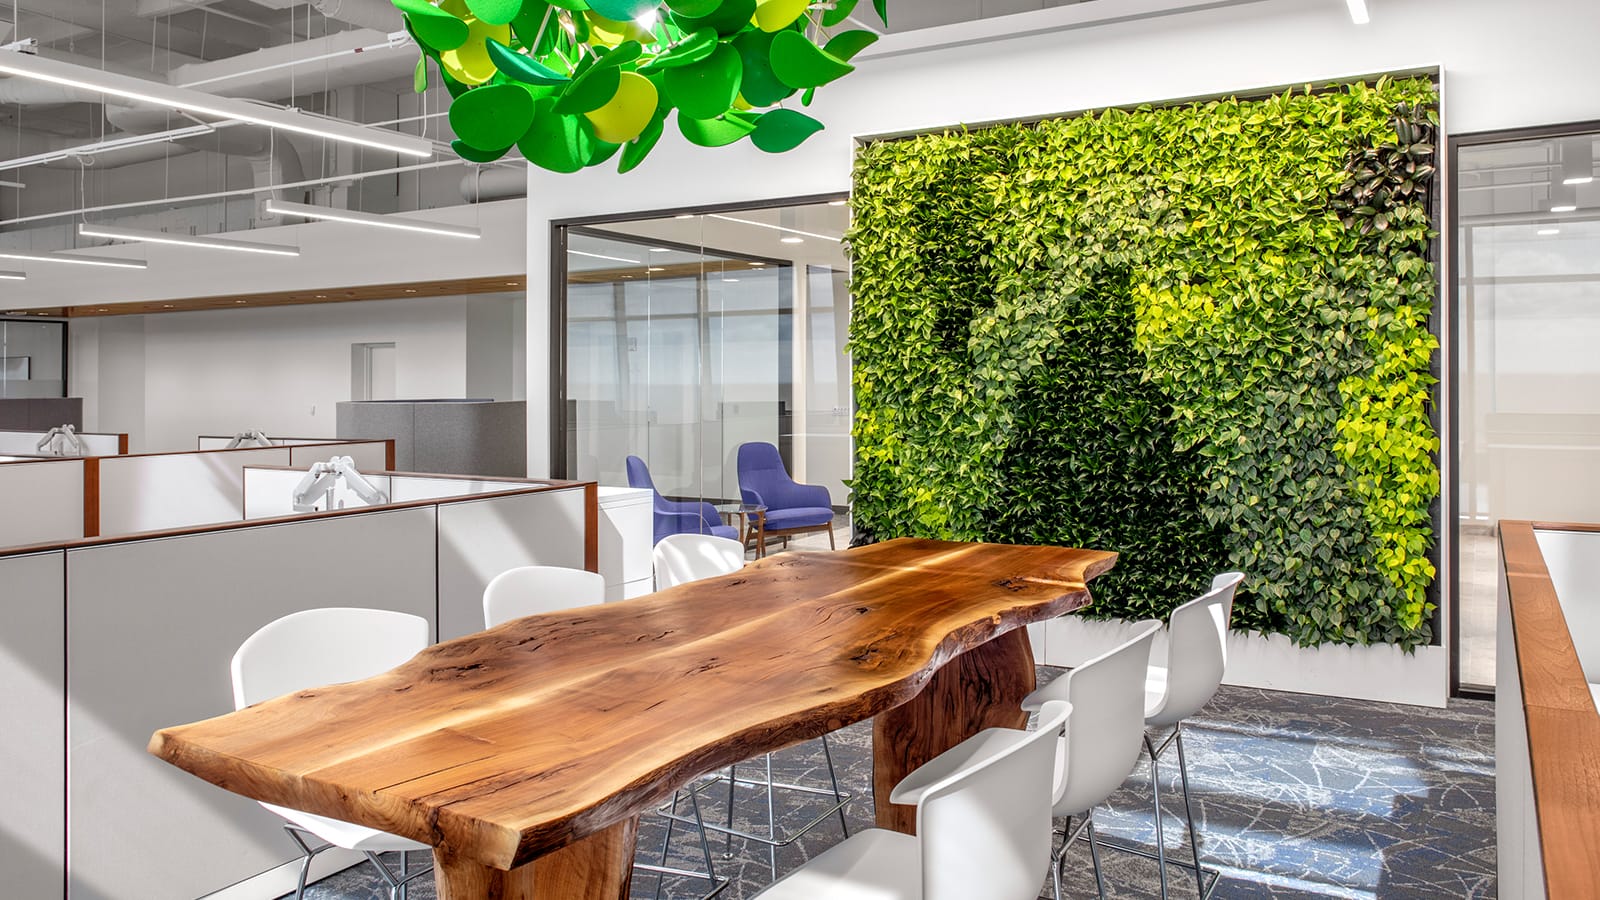 A living plant wall at the Arch Insurance work space in Raleigh